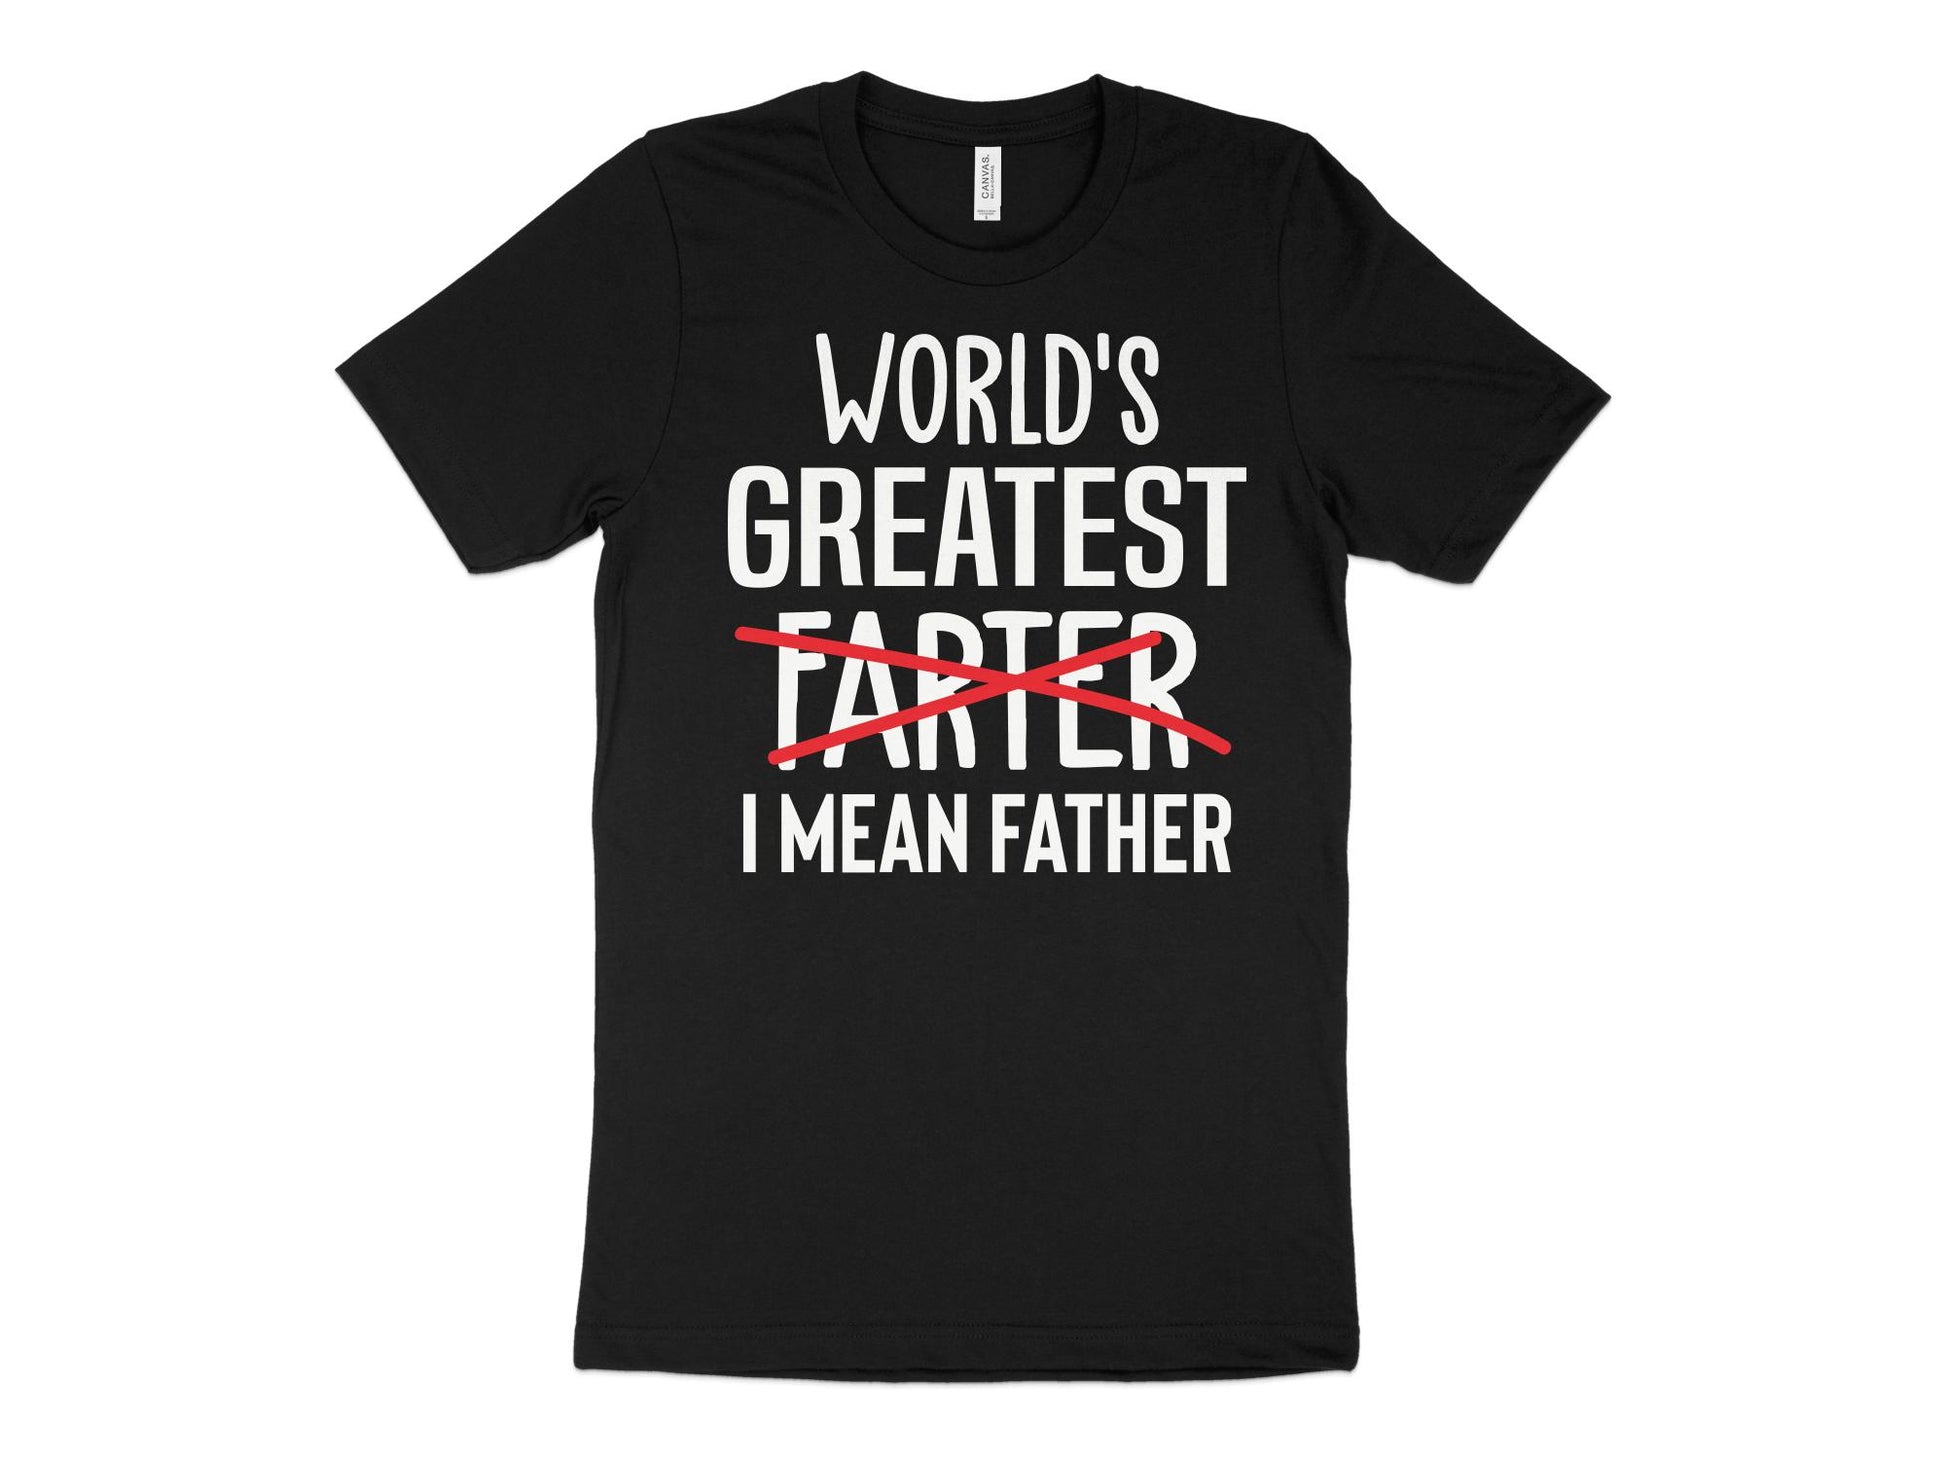 World's Greatest Farter I Mean Father Shirt, black